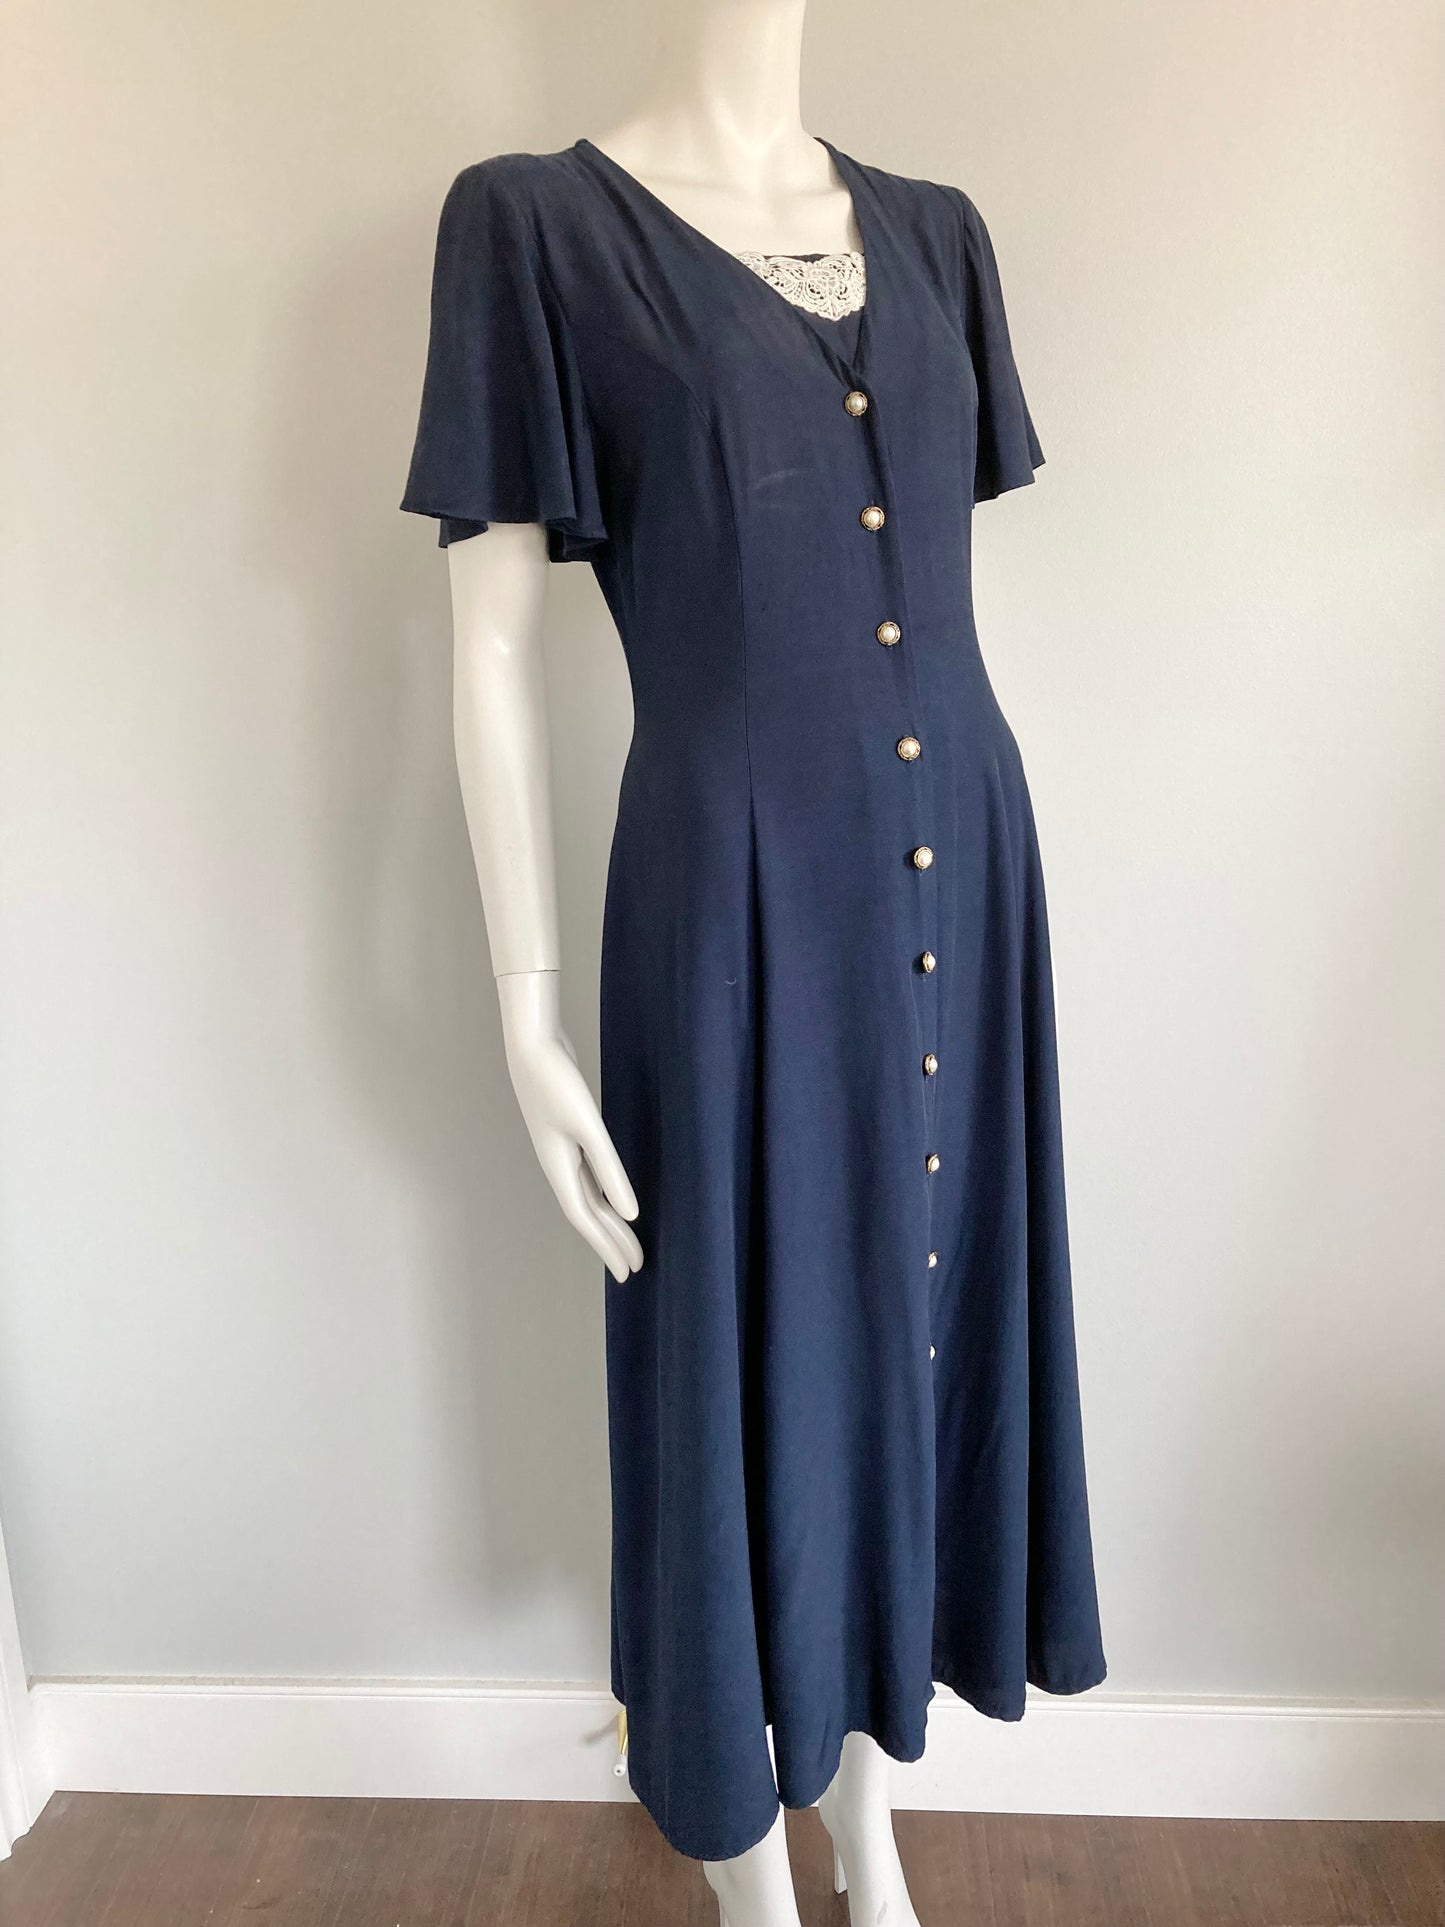 1990s Rayon Fit and Flare Day Dress, Size S